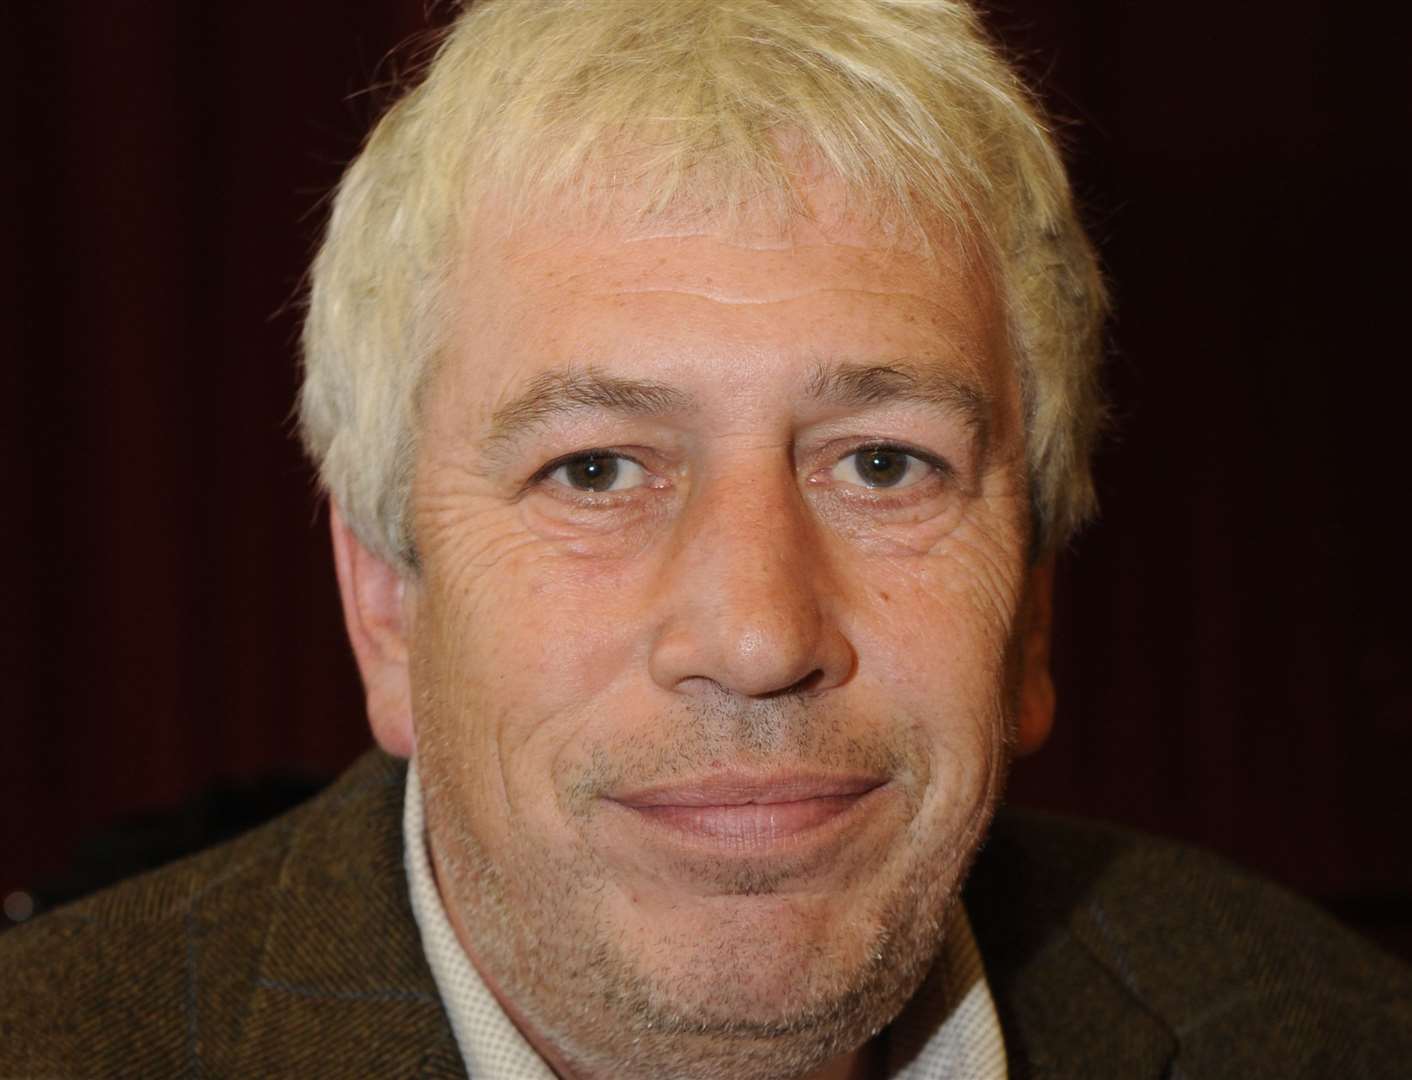 Columnist Rod Liddle has been branded a misogynist